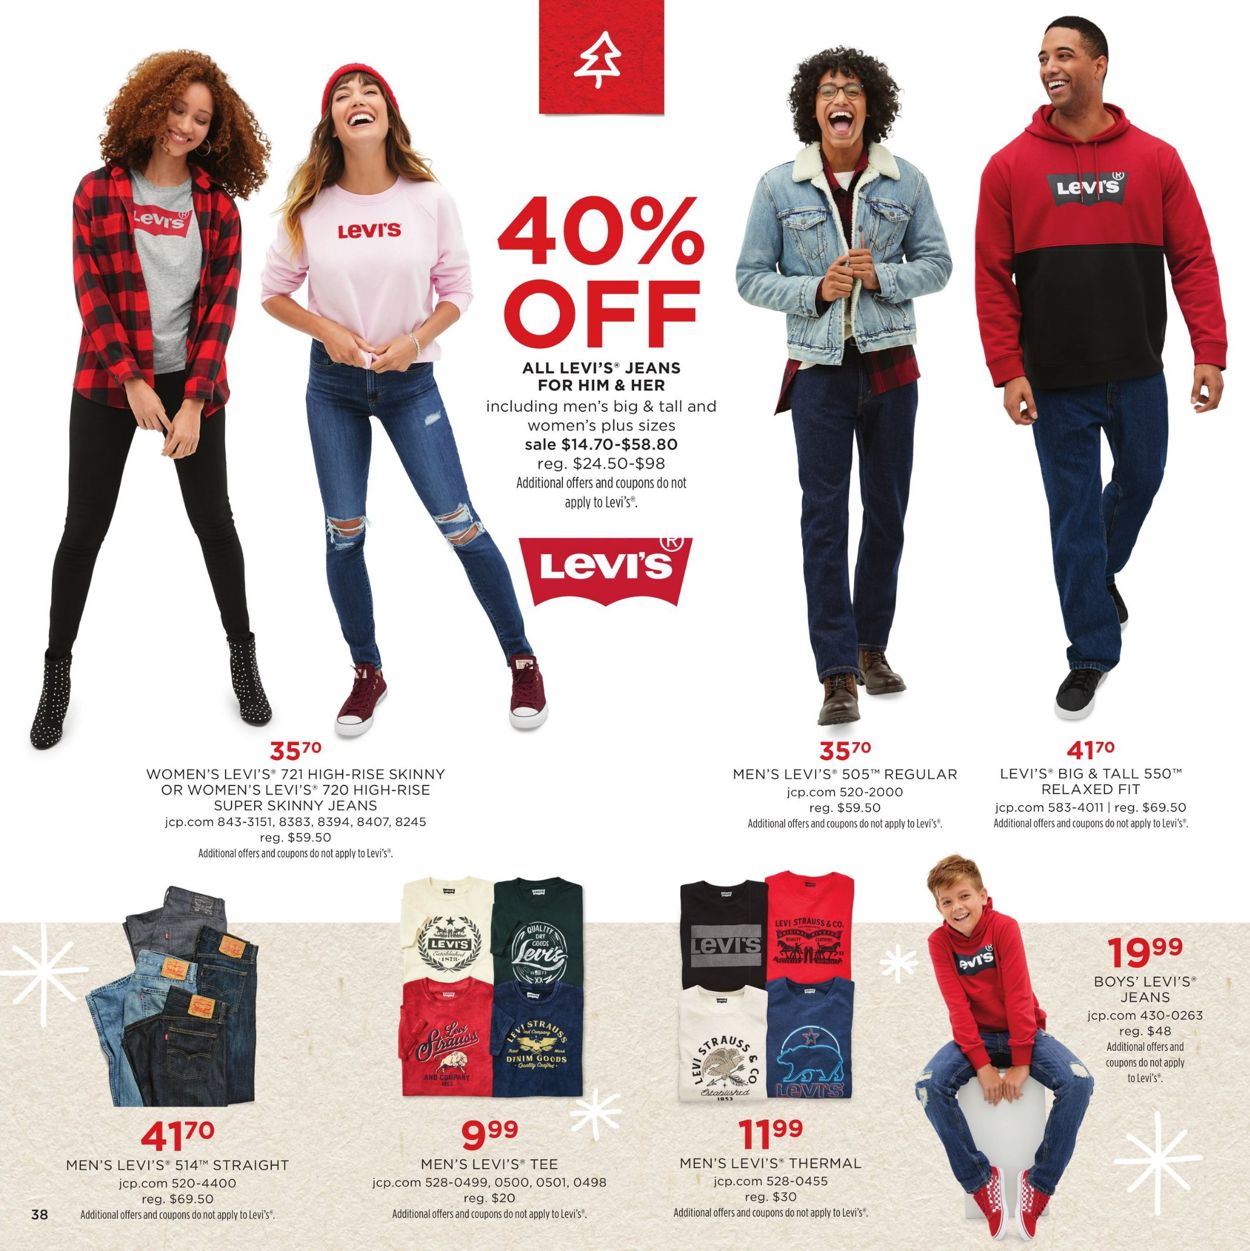 Jcpenney Levis 505 Top Sellers, SAVE 56%.